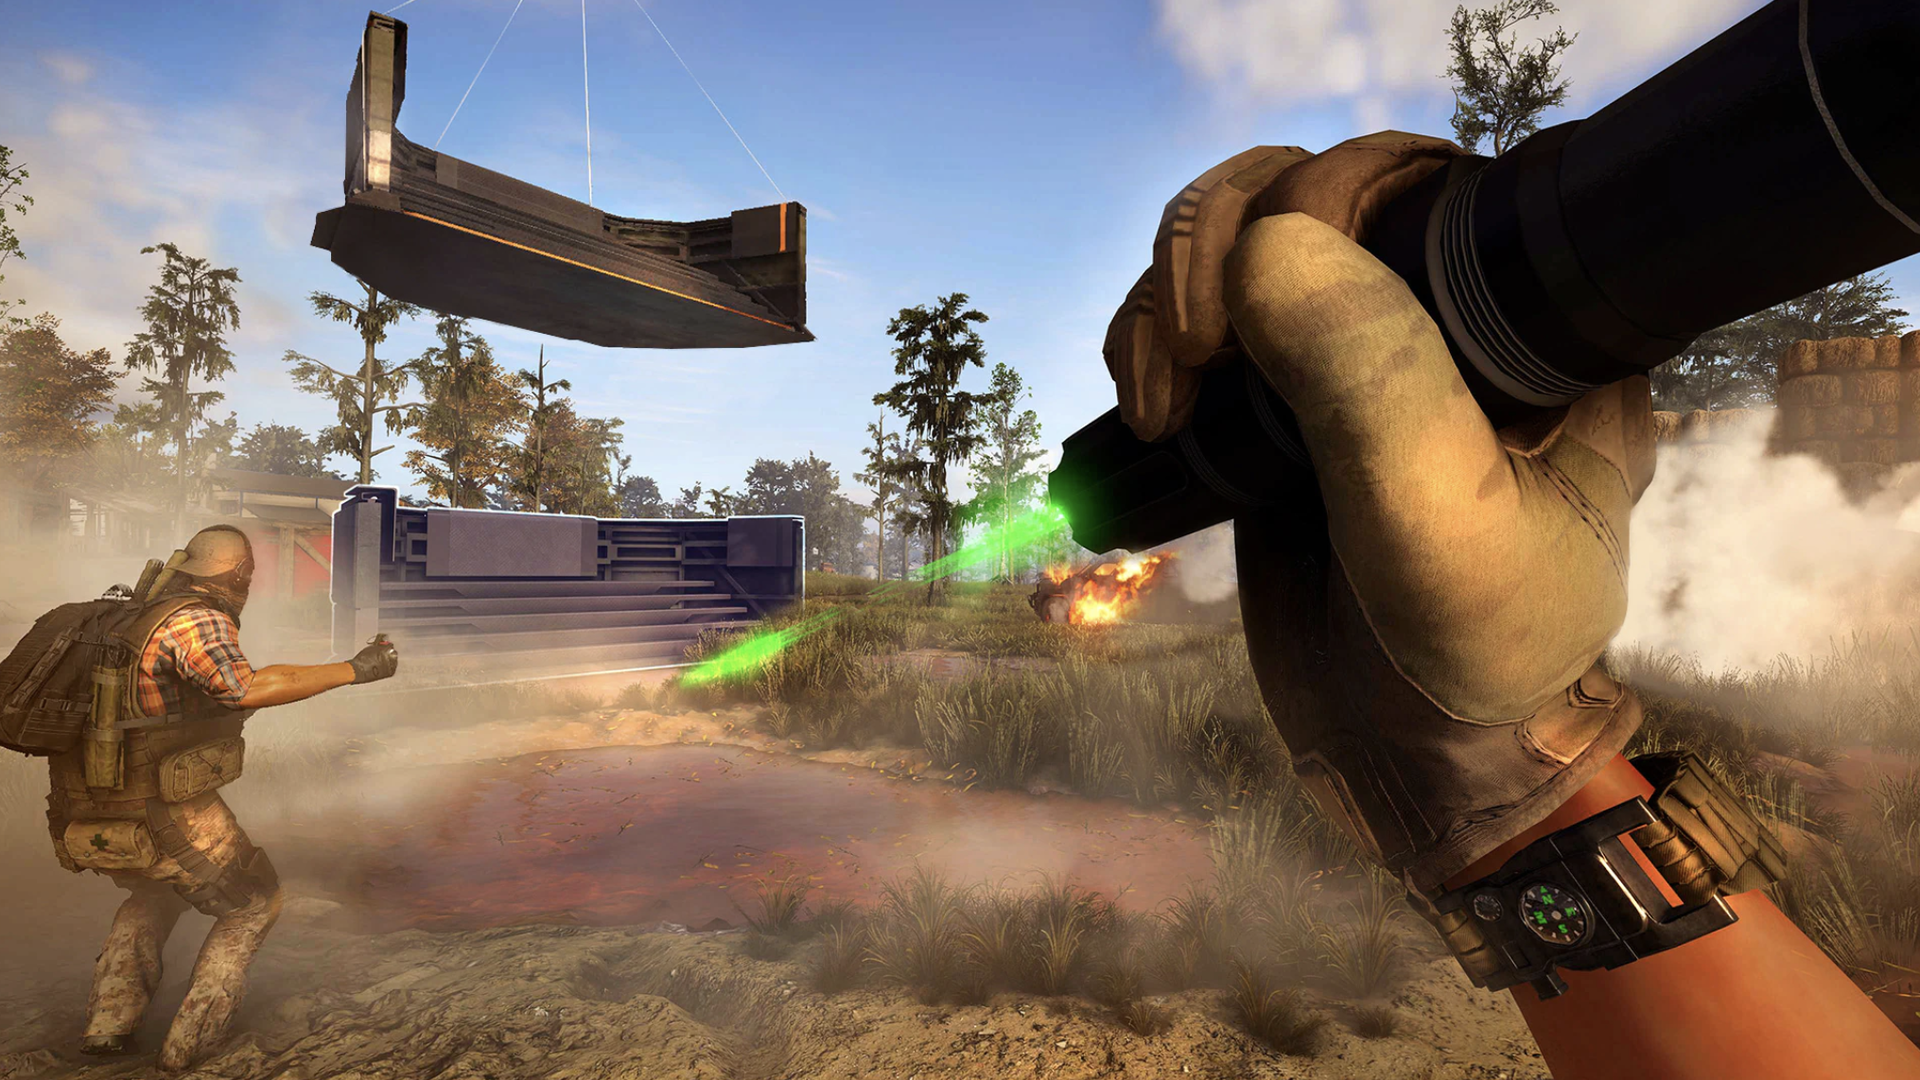 Video game screenshot showing a first person perspective of soldiers running toward an air-dropped box